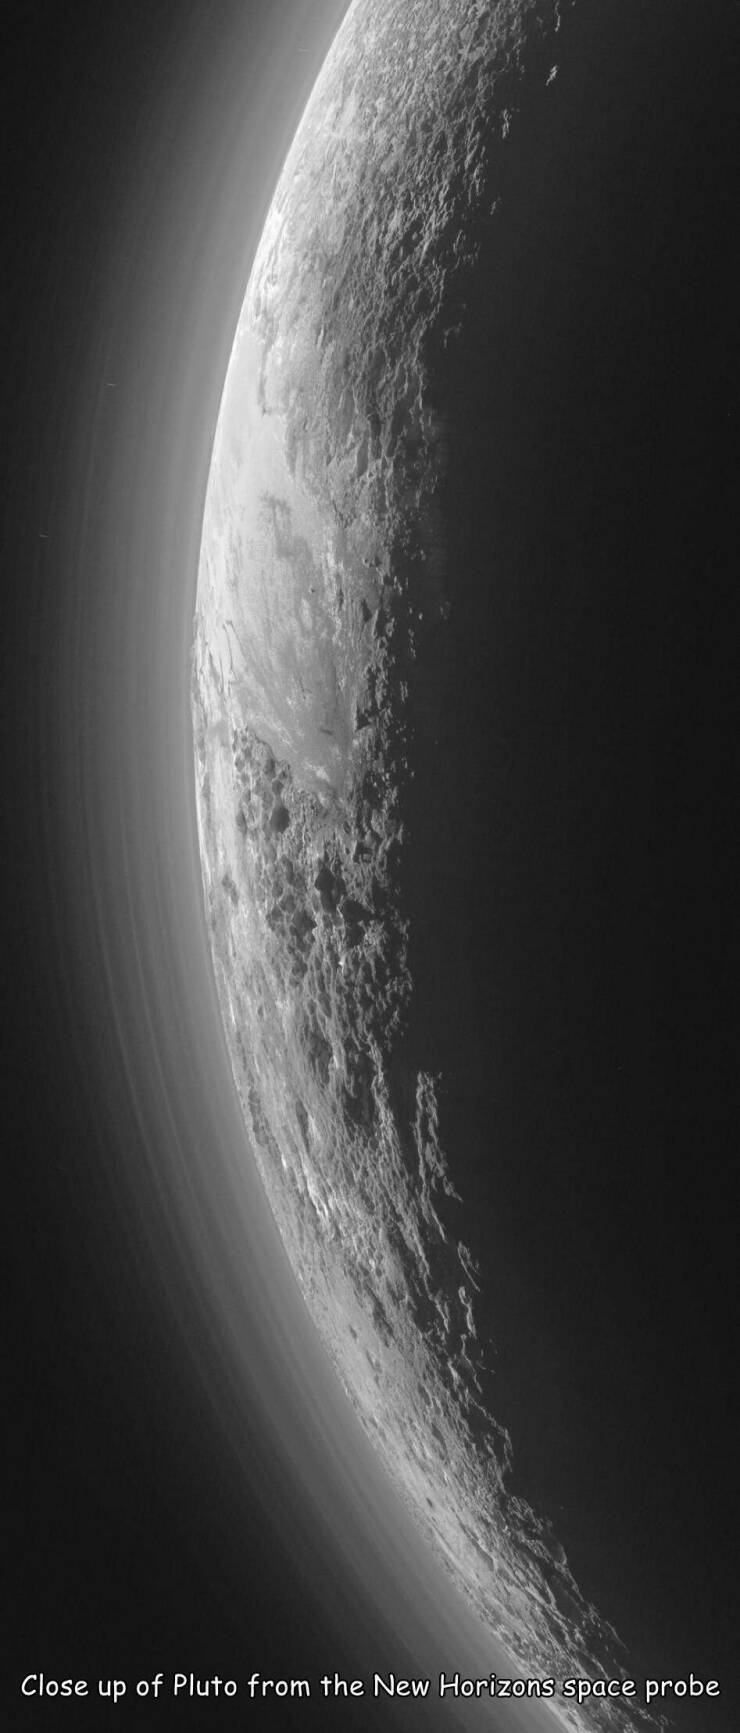 sunset on pluto - Close up of Pluto from the New Horizons space probe